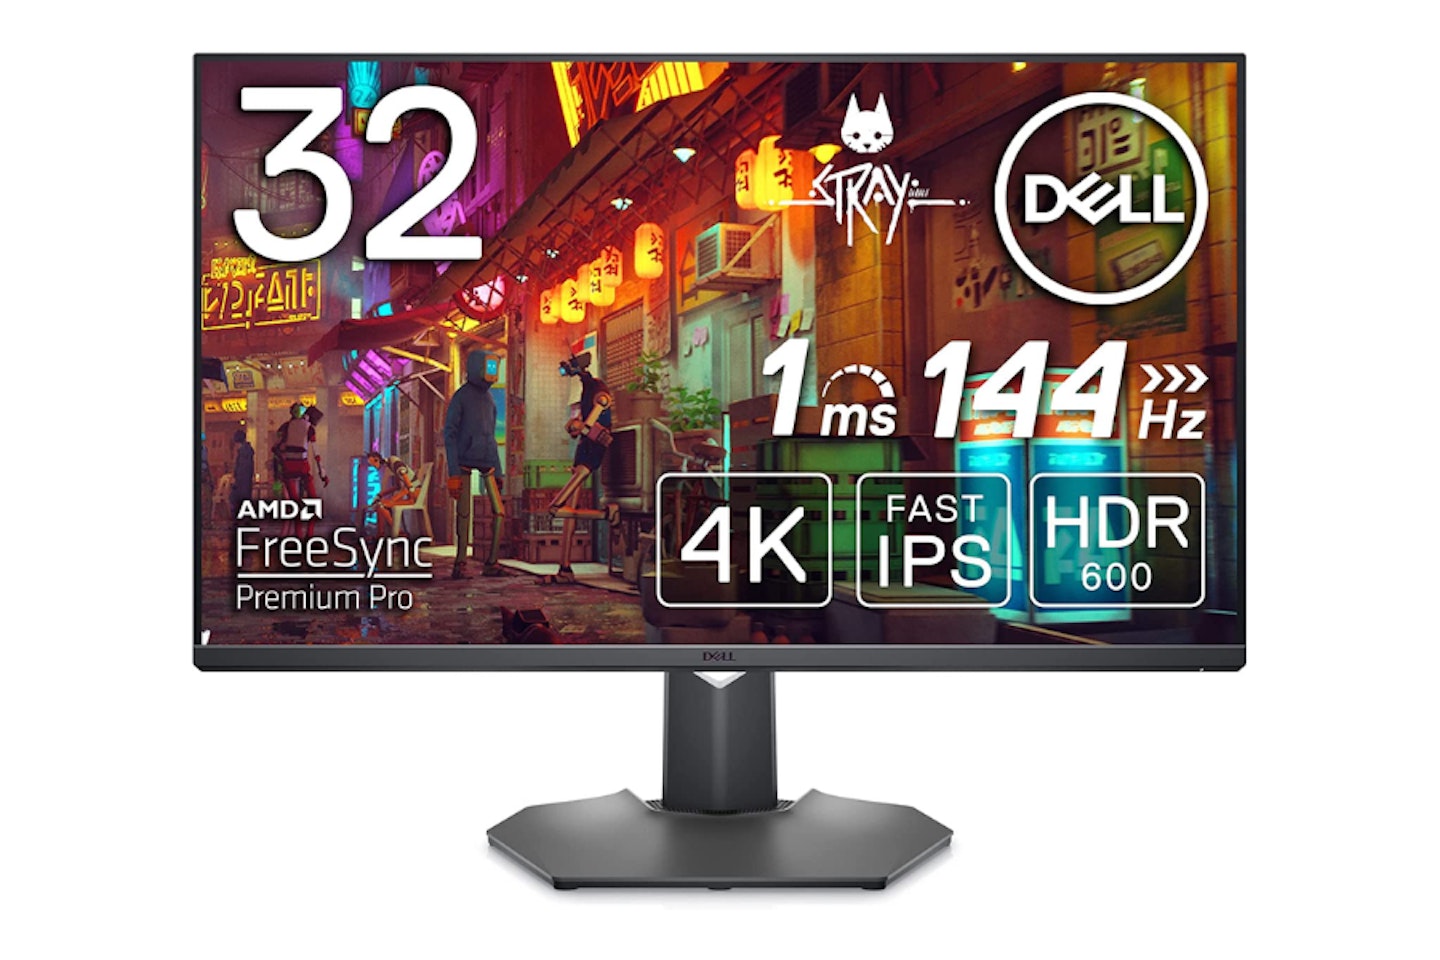 Dell G3223Q 32 Inch 4K UHD (3840x2160) Gaming Monitor - one of the Best monitors for PS5